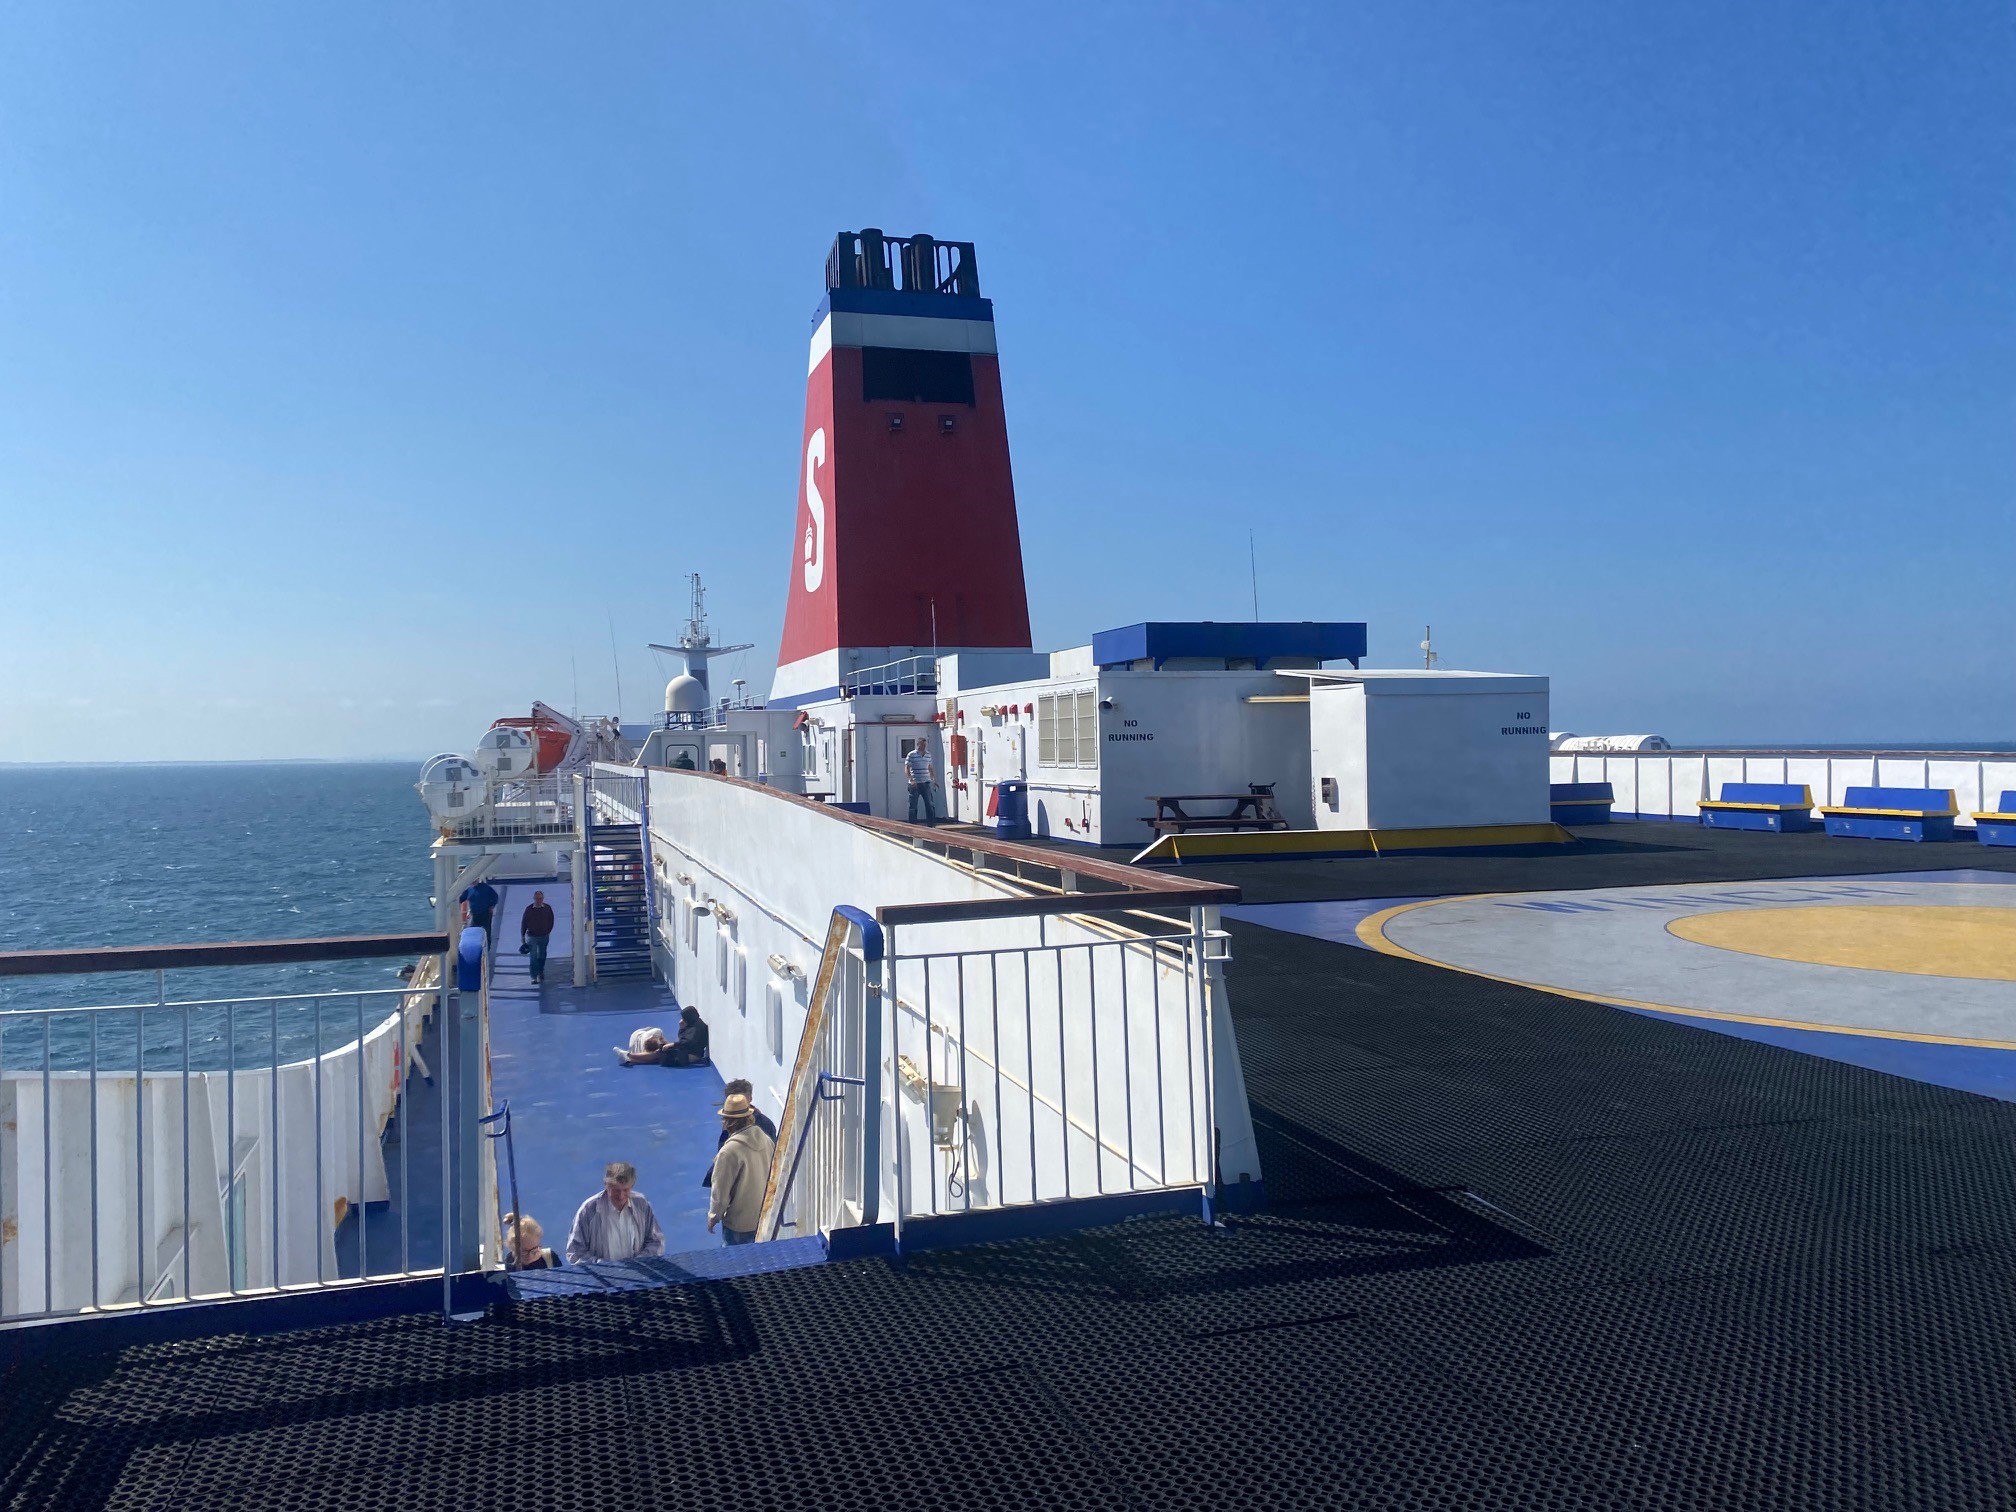 A view from onboard the Stena Line ferry